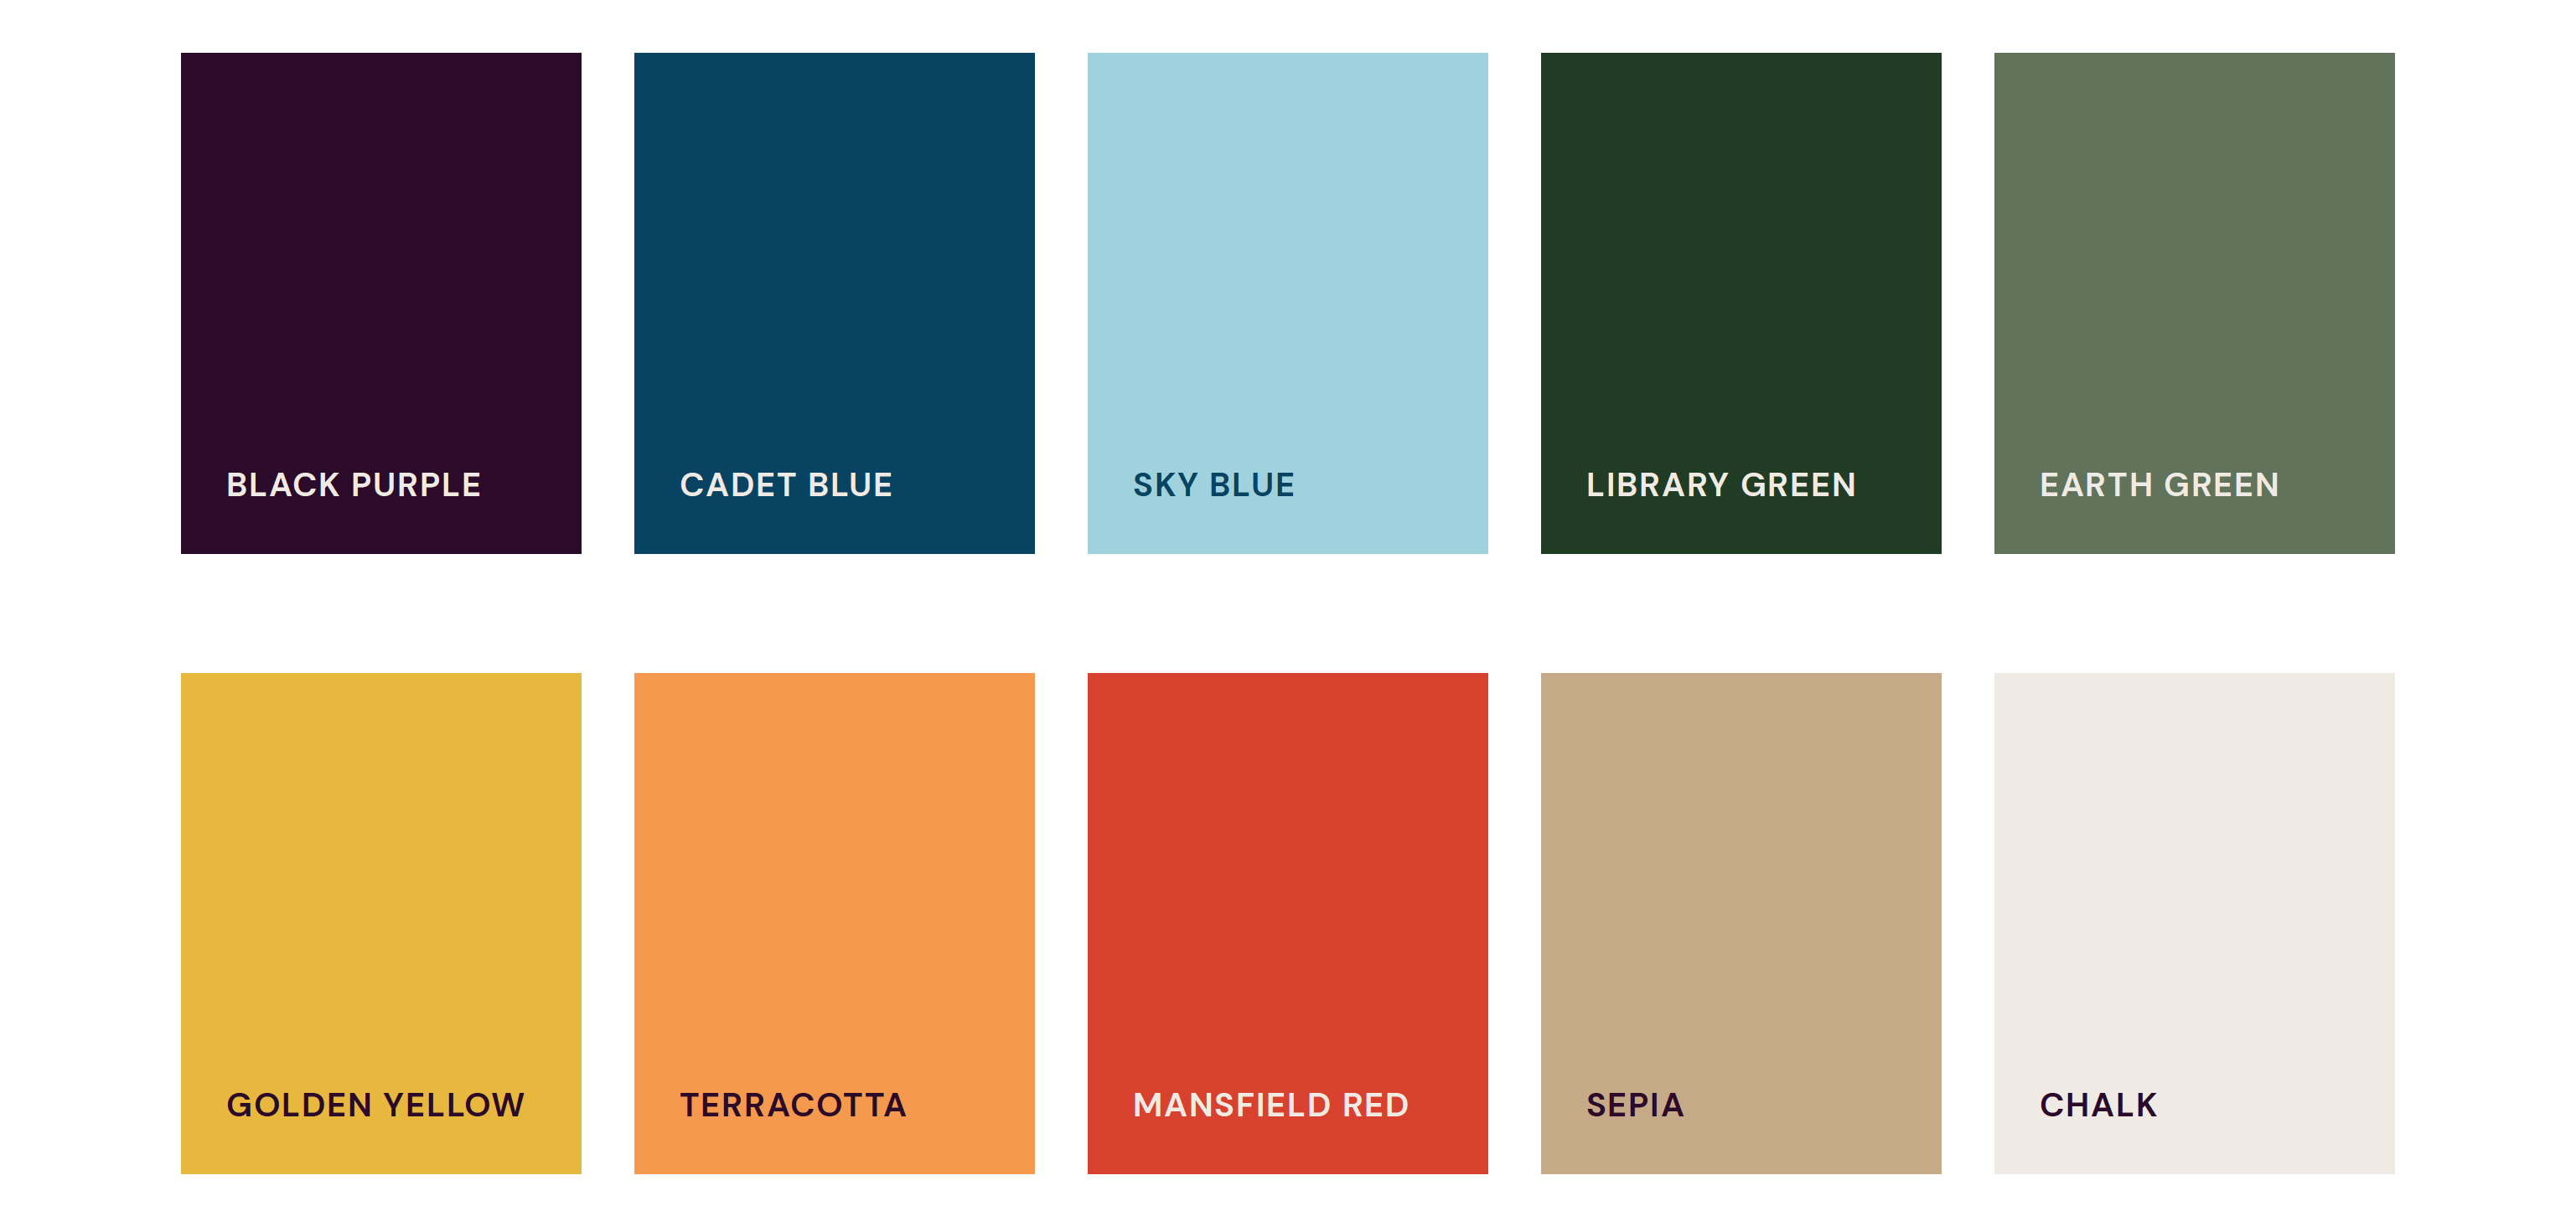 colour palette showing ten brand colours for Mansfield College, Oxford. Colours are named black purple, cadet blue, sky blue, library green, earth green, golden yellow, terracotta, mansfield red, sepia and chalk.